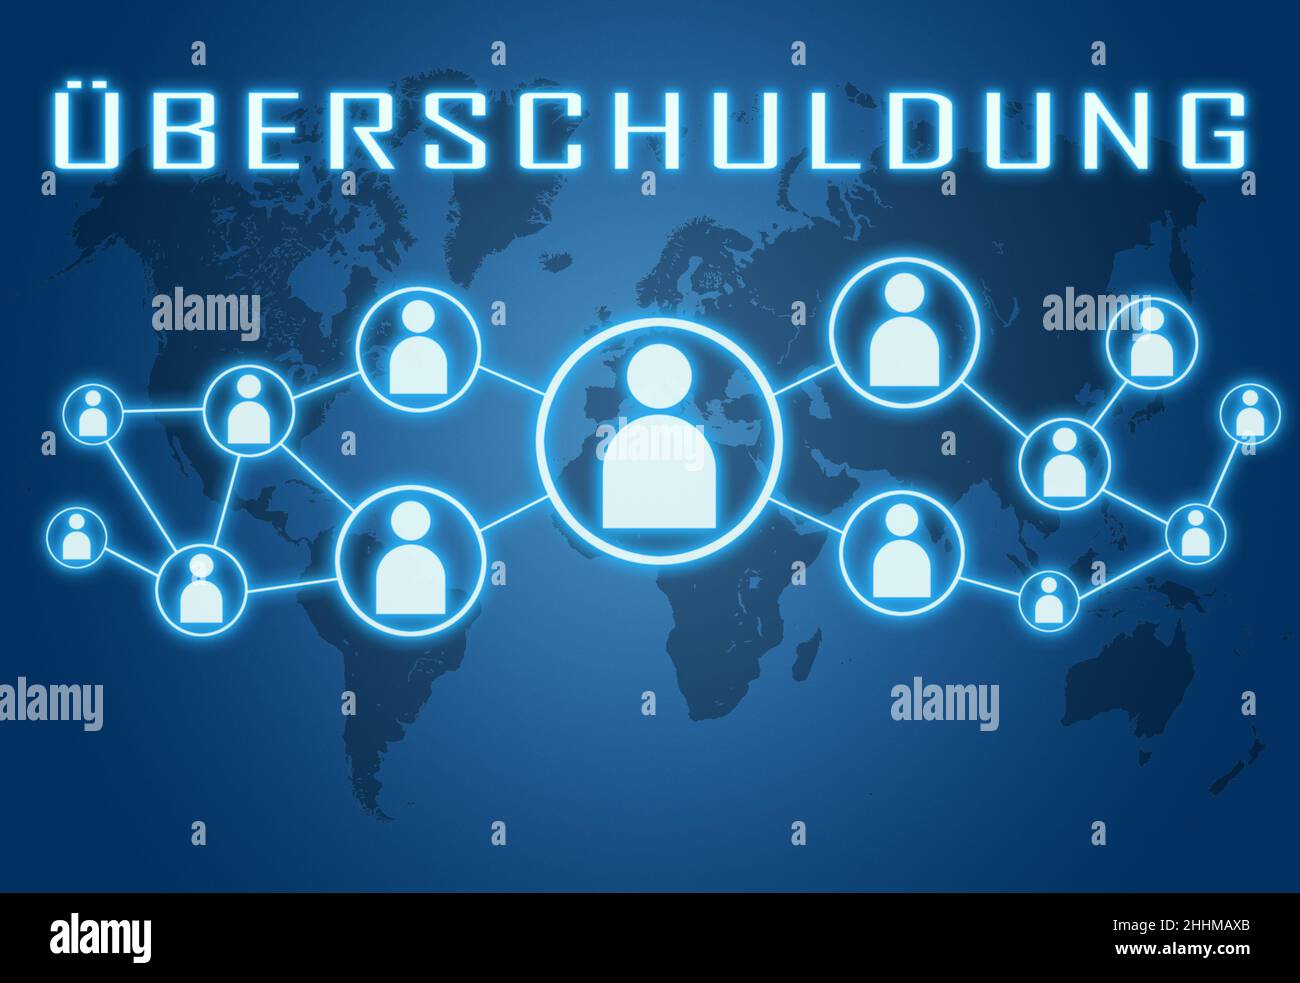 Ueberschuldung - german word for over indebtedness - text concept on blue background with world map and social icons. Stock Photo